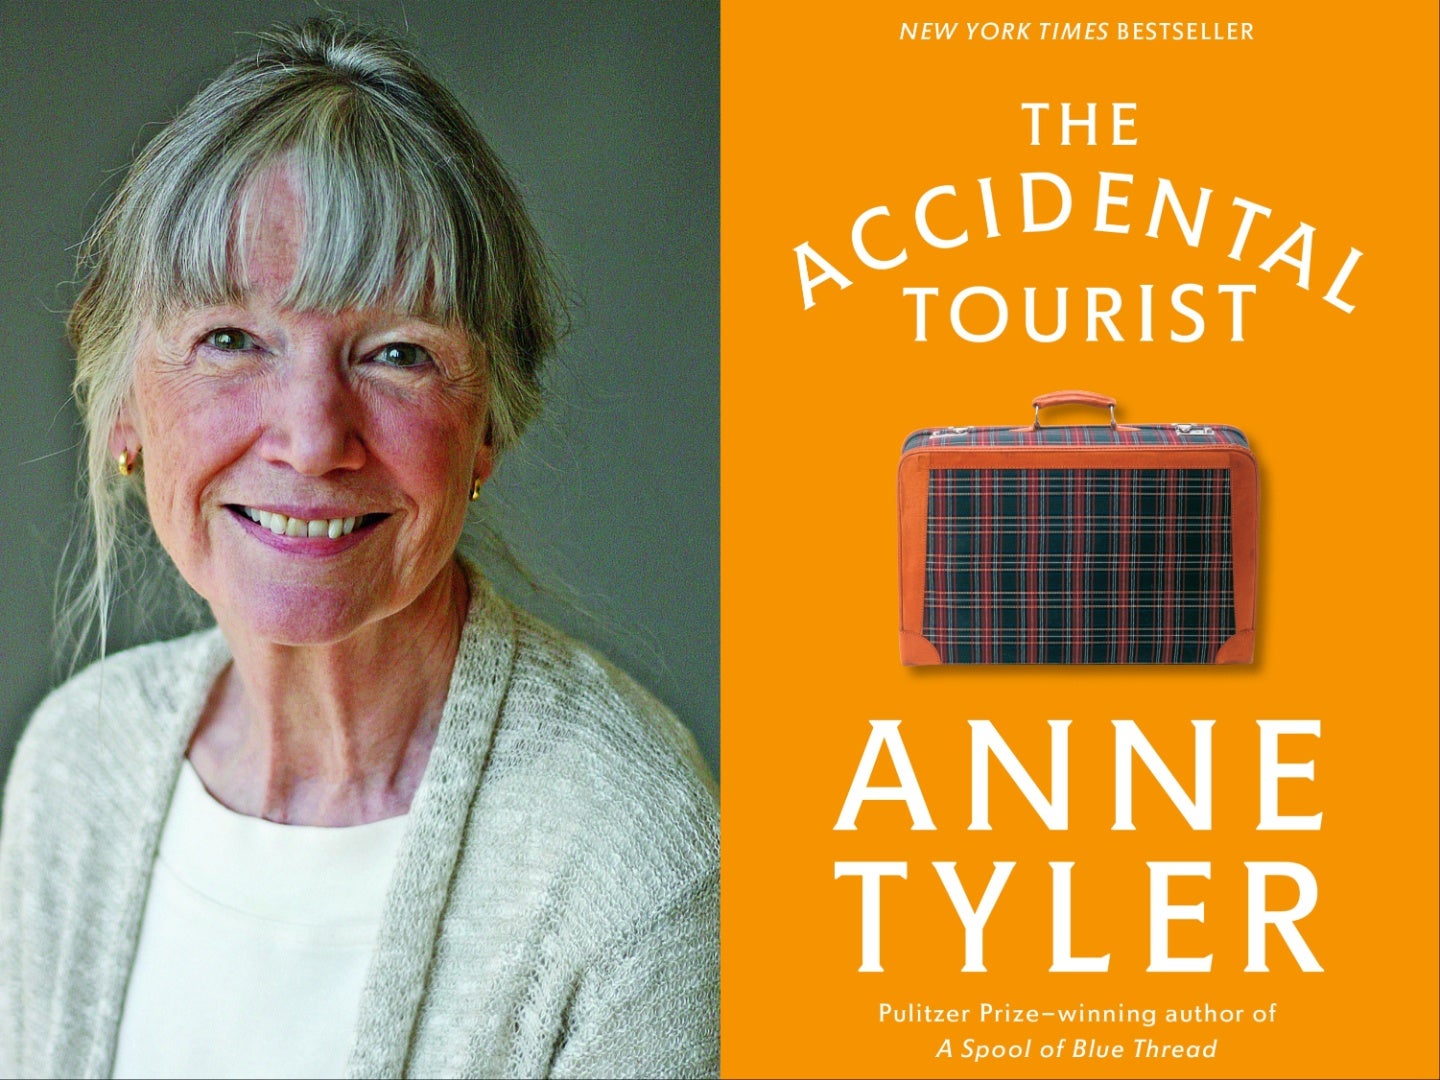 Author Anne Tyler, left, and the front cover of her novel The Accidental Tourist, right